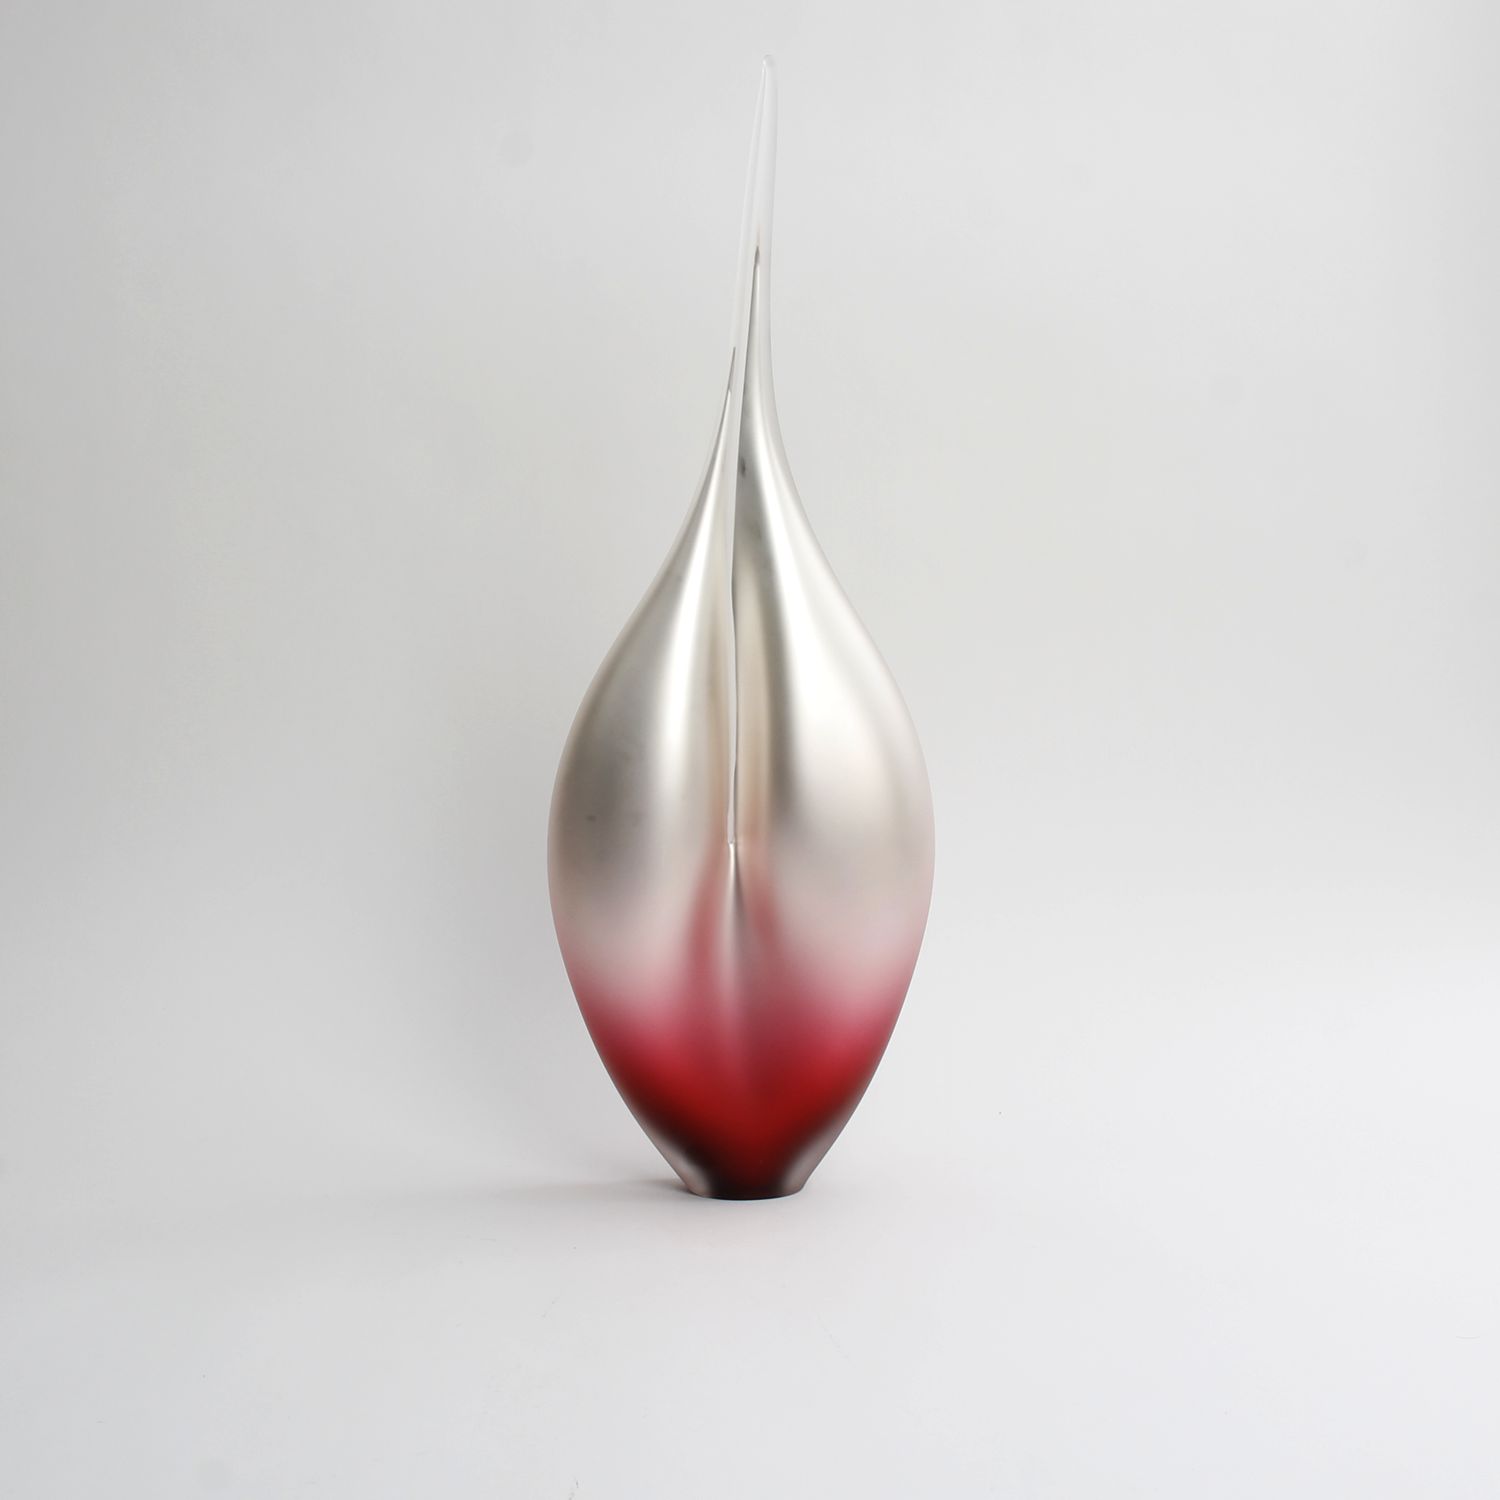 Soffi Studio: Large Pink Pearl Flame Product Image 1 of 2